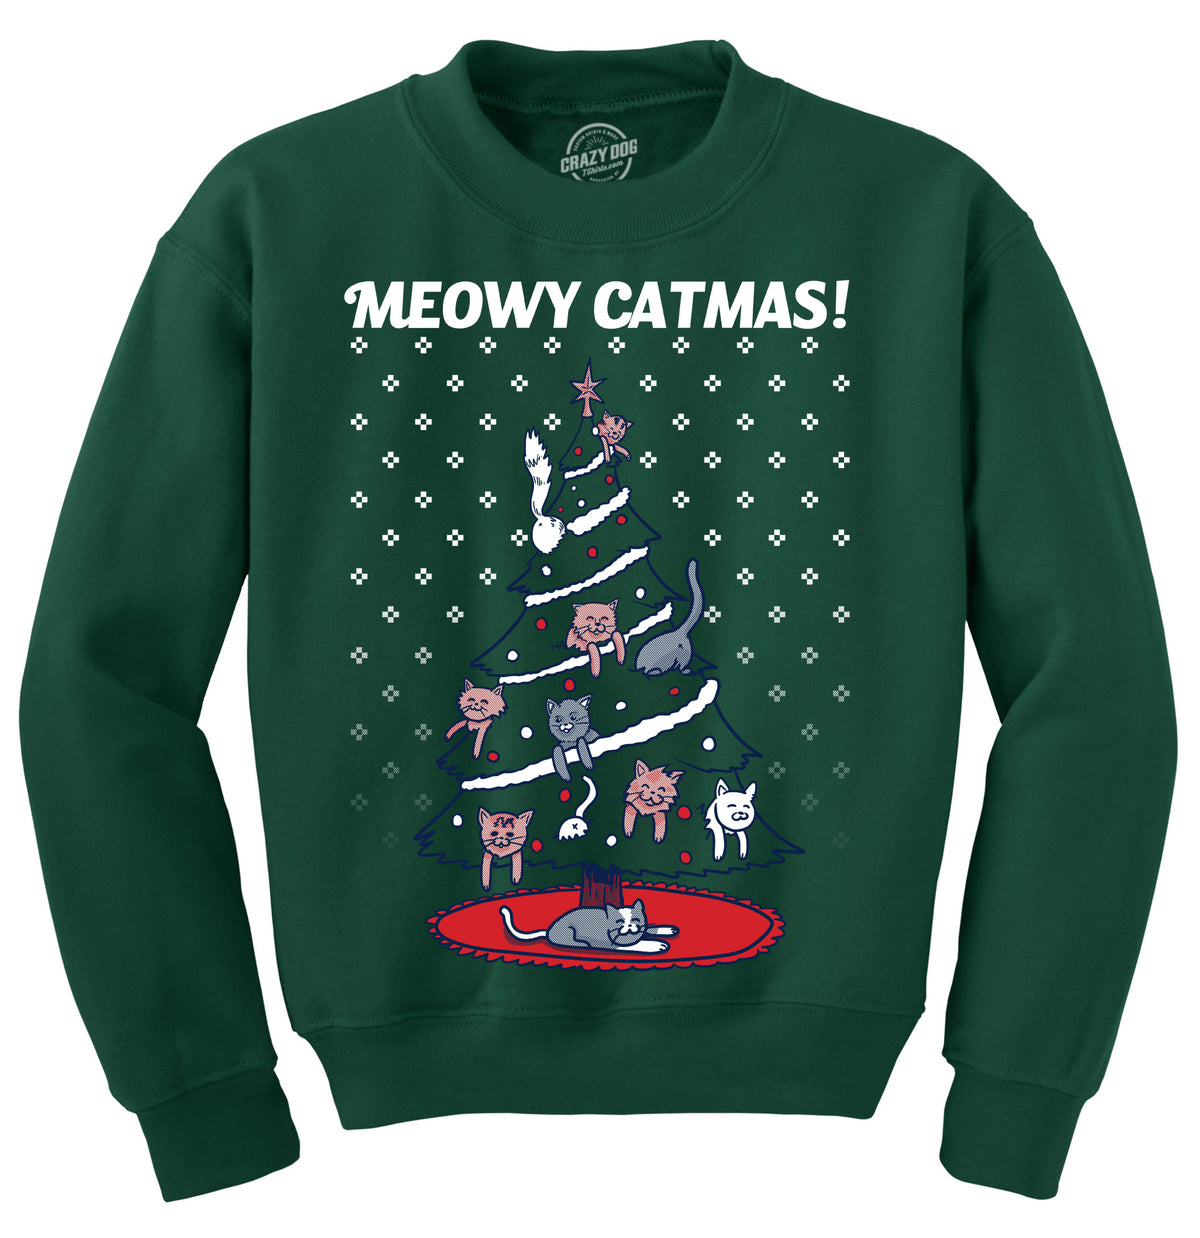 Funny Forest Green Meowy Catmas Sweatshirt Nerdy Christmas Cat Ugly Sweater Tee